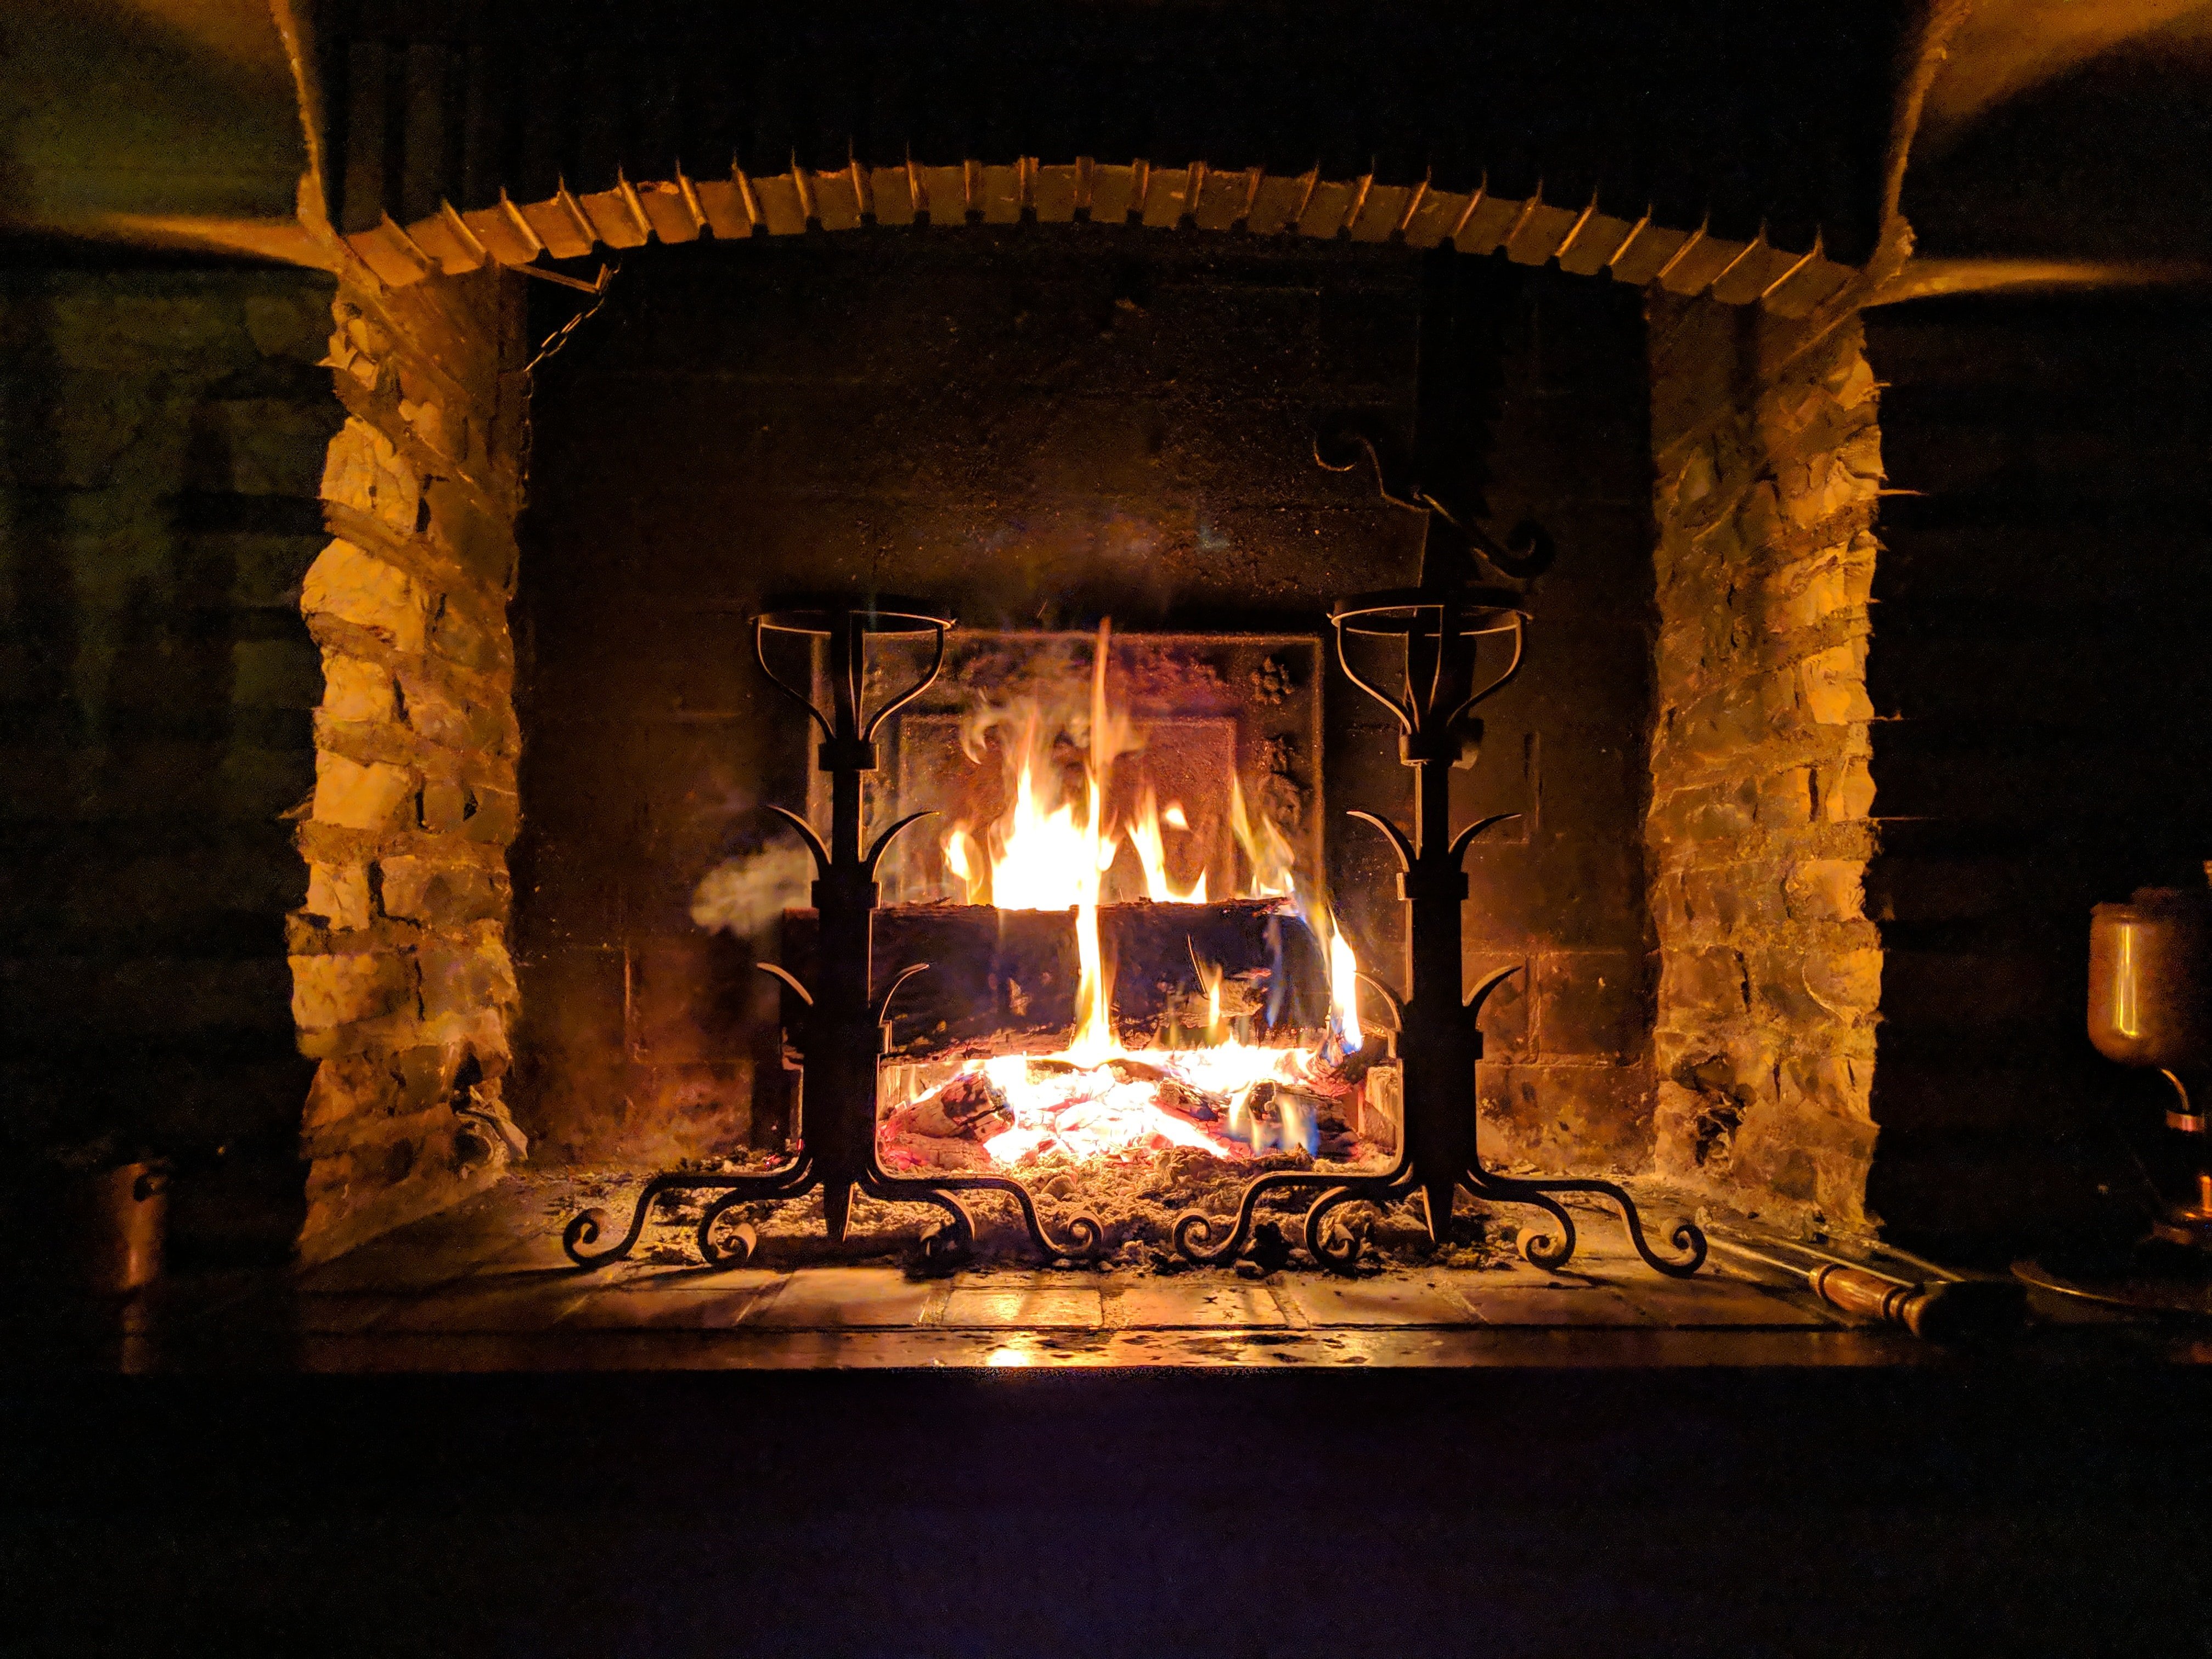 Justin and Kyle toasted their sandwiches in the old fireplace. | Source: Unsplash